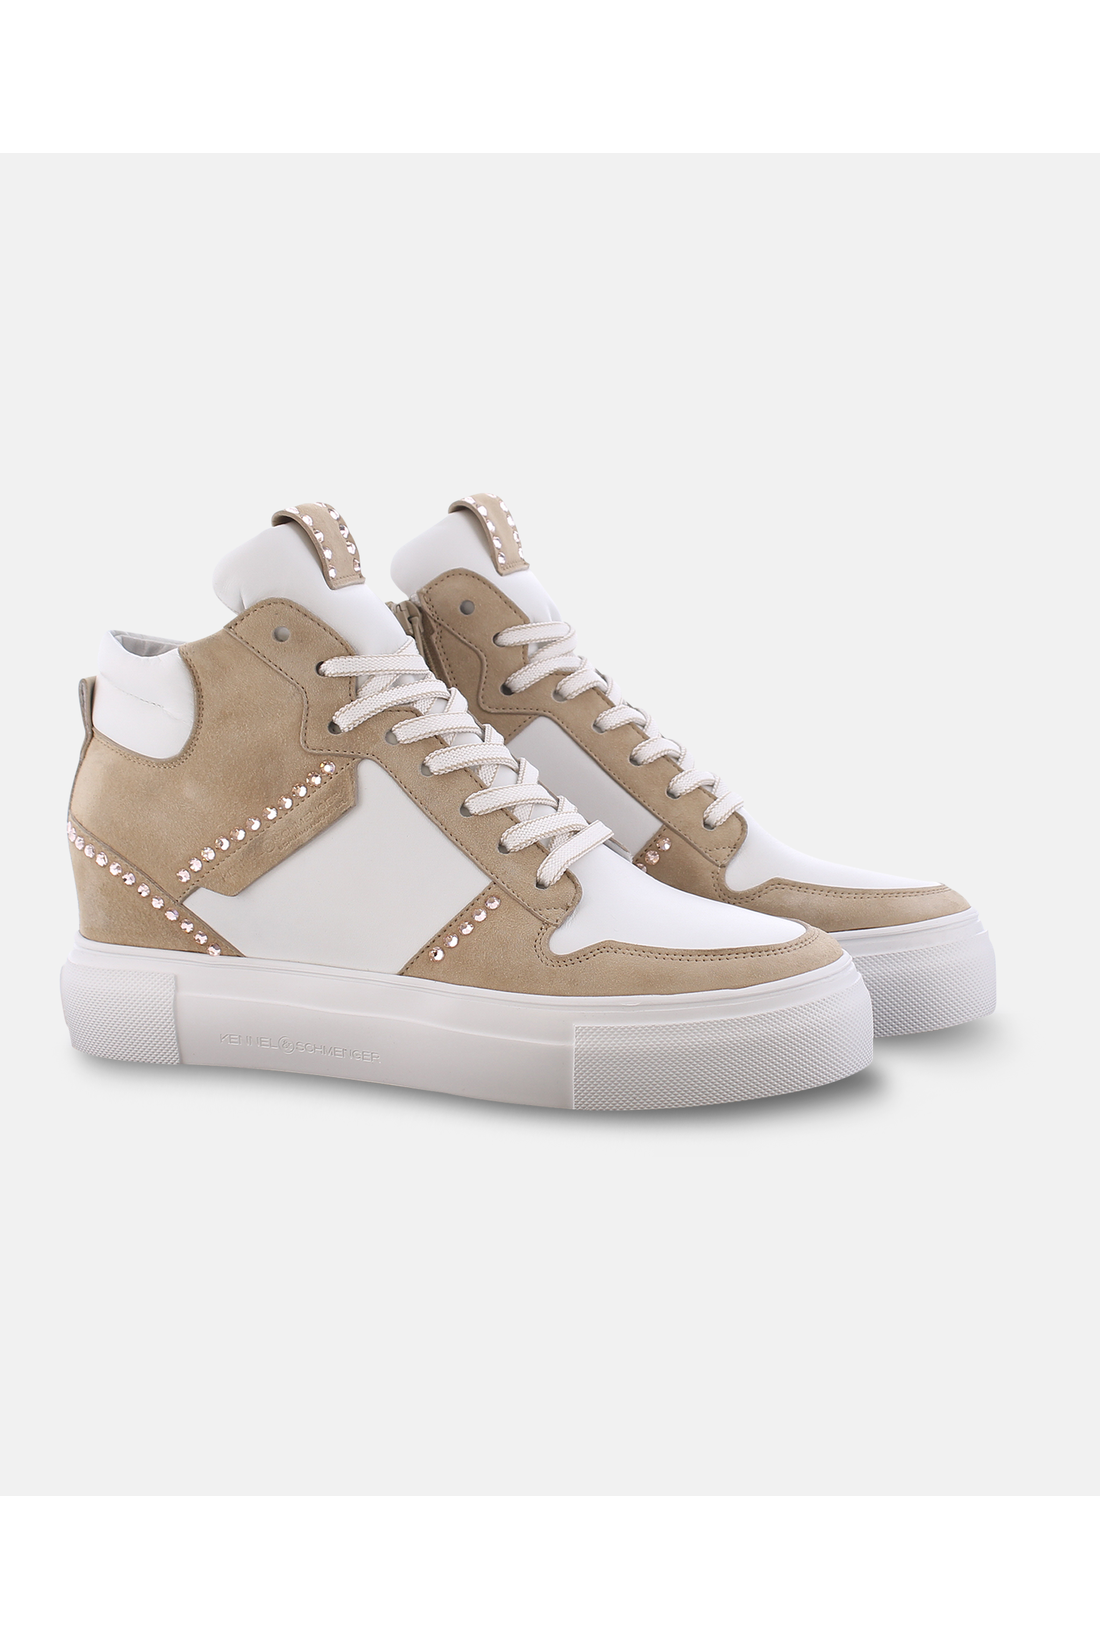 Kennel-Schmenger-OUTLET-SALE-CHAMP-Sneakers-2_5-35-Hellbraun-ARCHIVE-COLLECTION.png